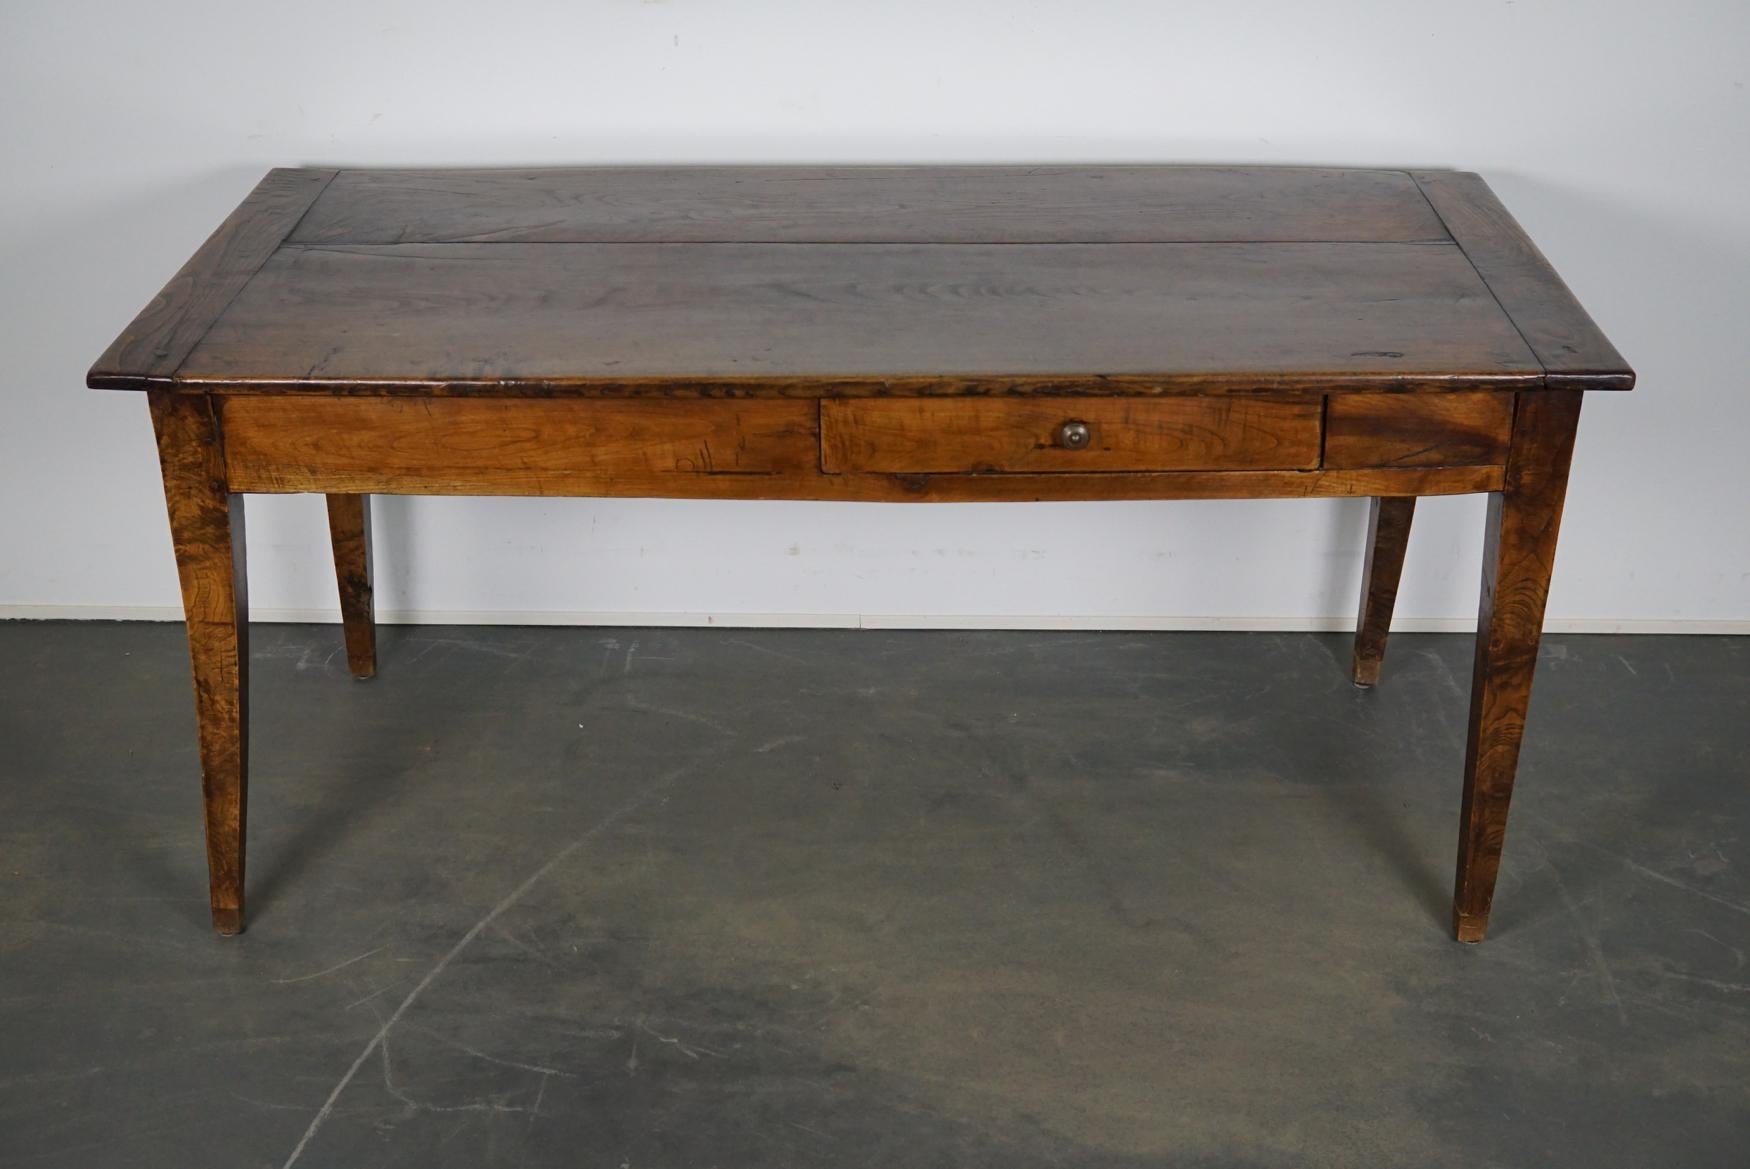 This French farmhouse table was made between 1840 and 1860 in France. It retained a very nice rich patina over the years.